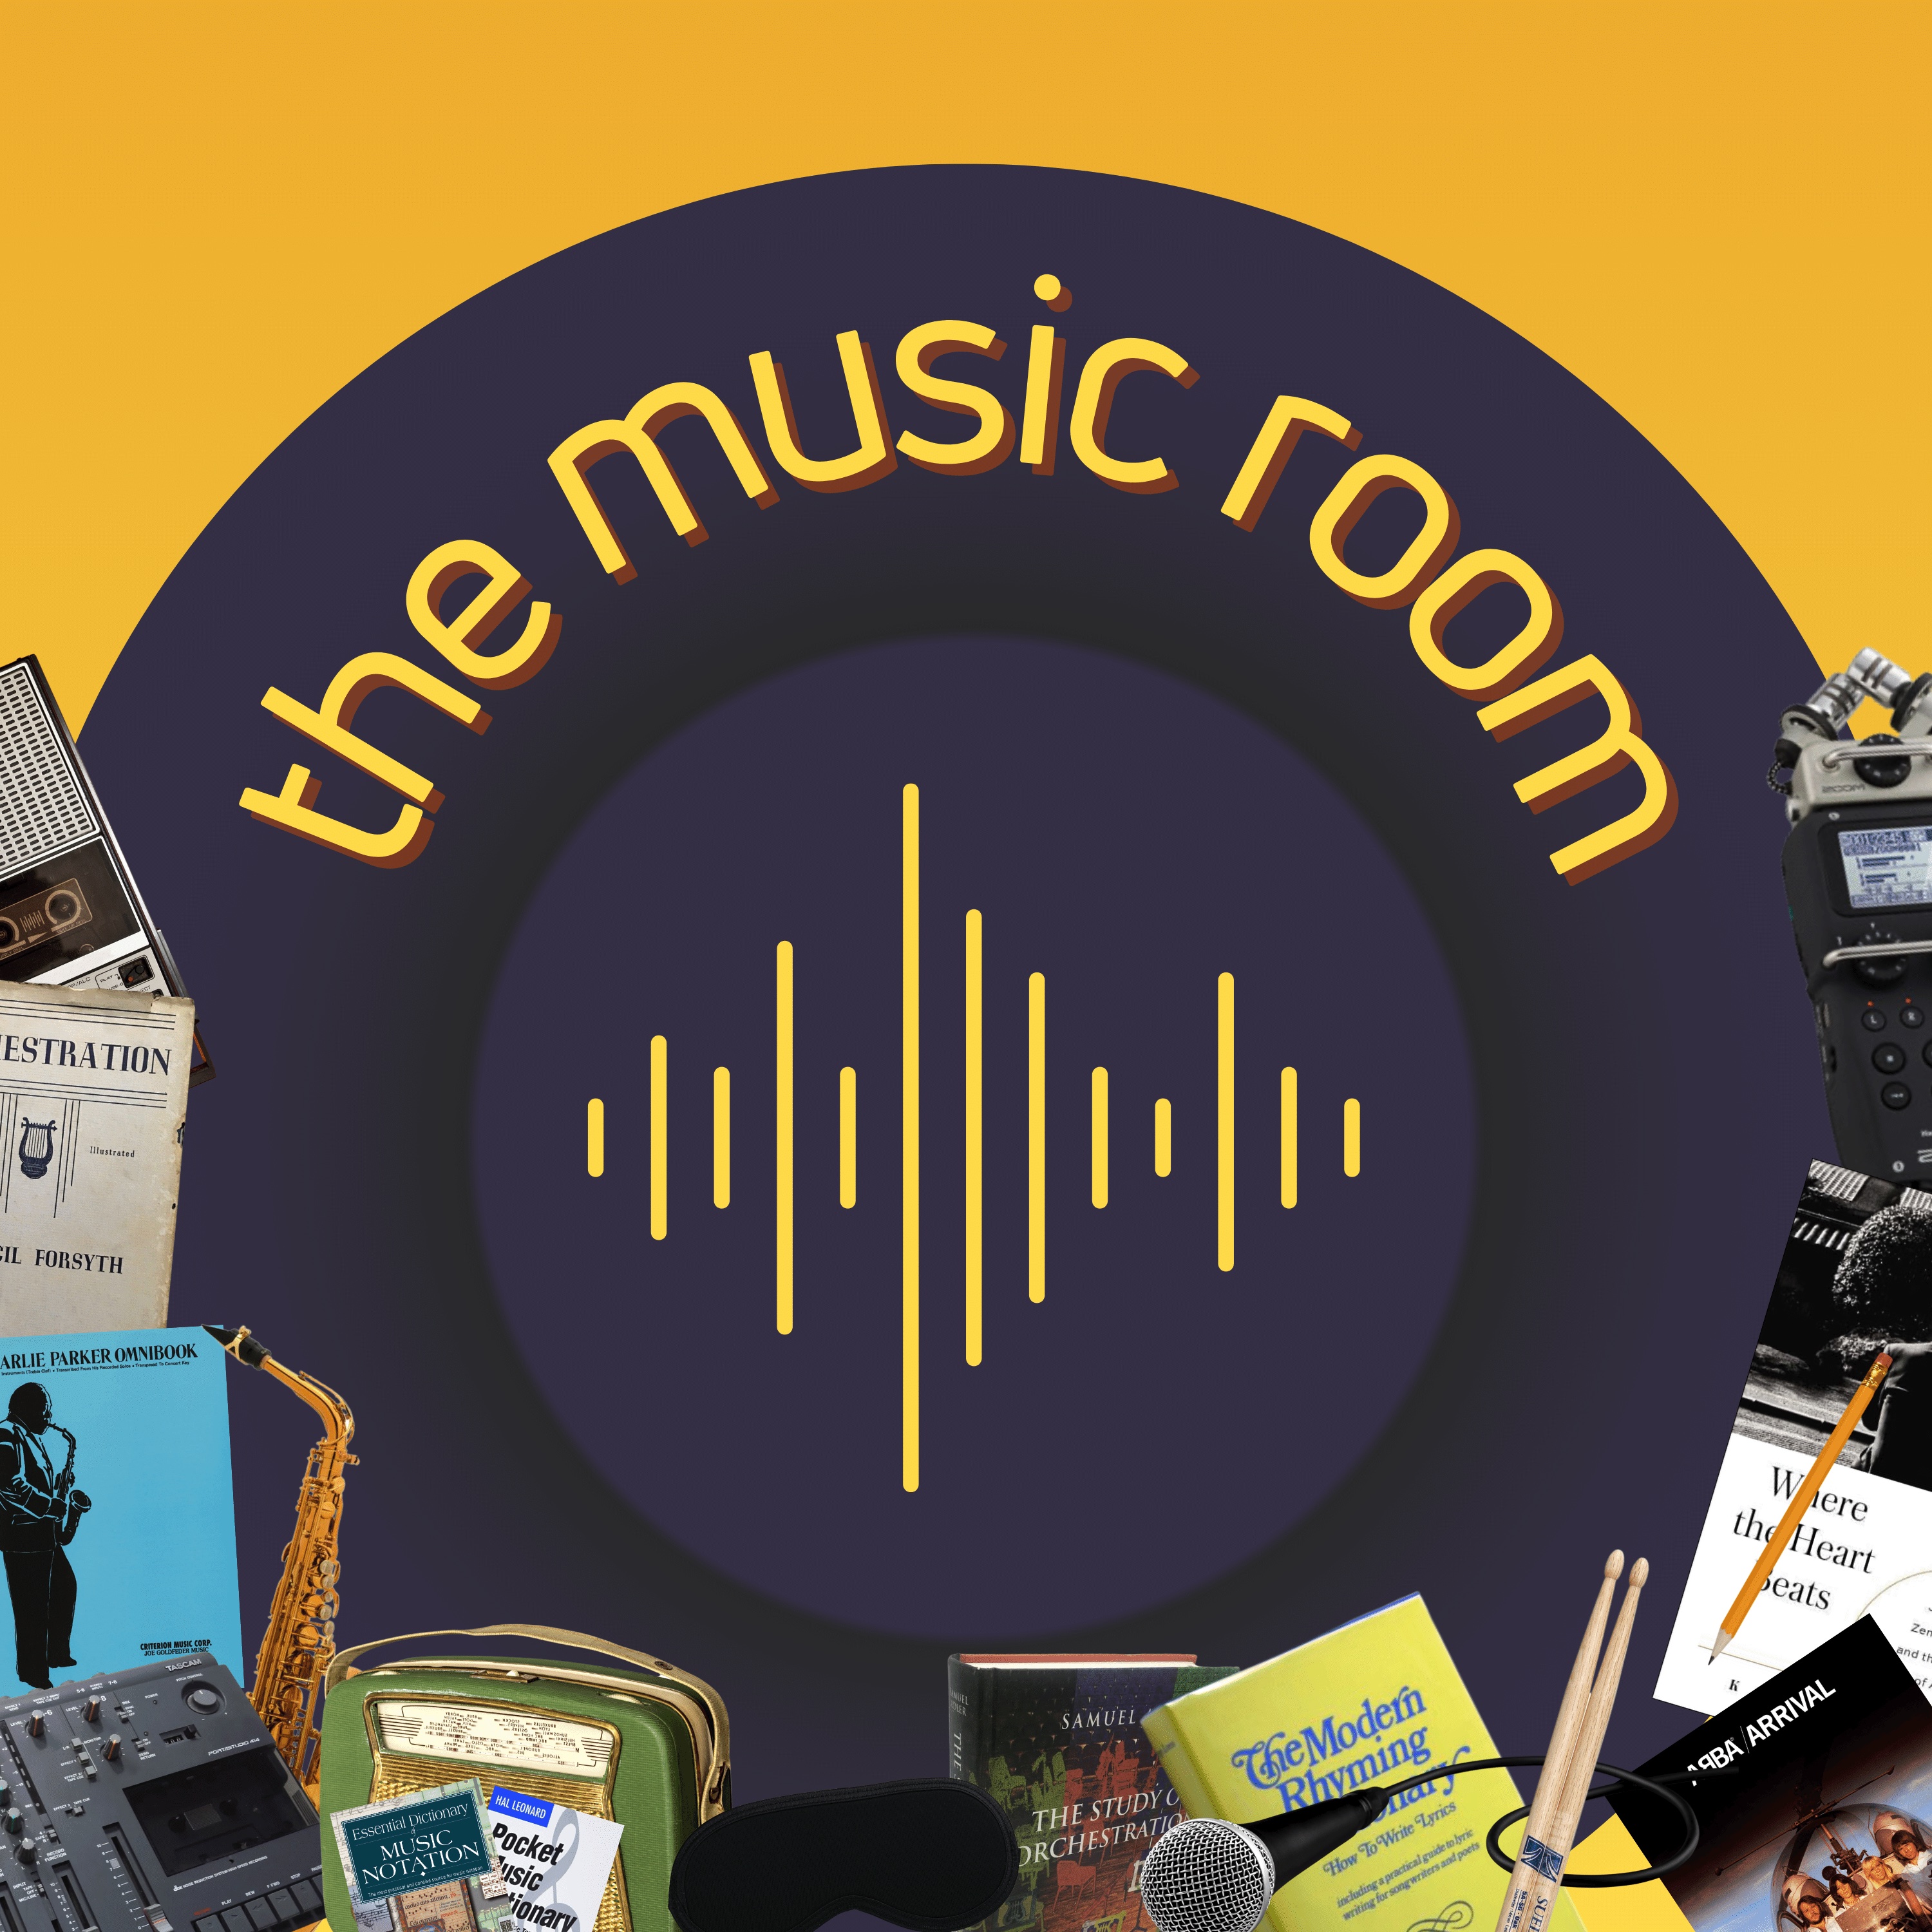 Show artwork for The Music Room